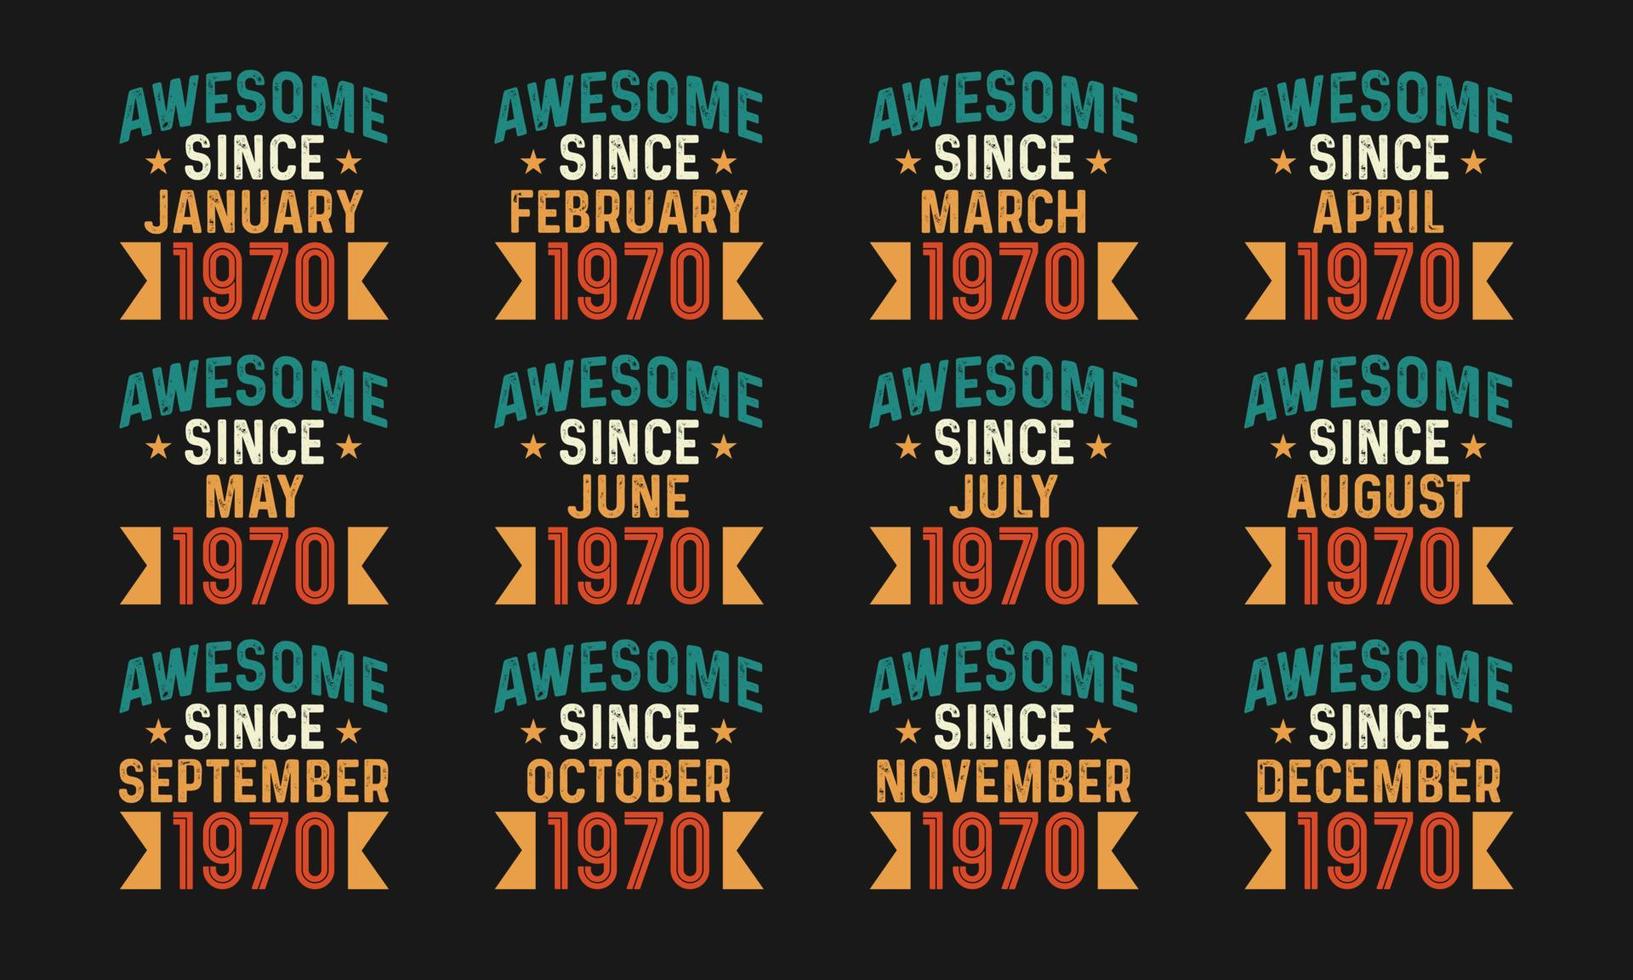 Awesome since January, February, March, April, May, June, July, August, September, October, November, and December 1970. Retro vintage all month in 1970 birthday celebration free download vector